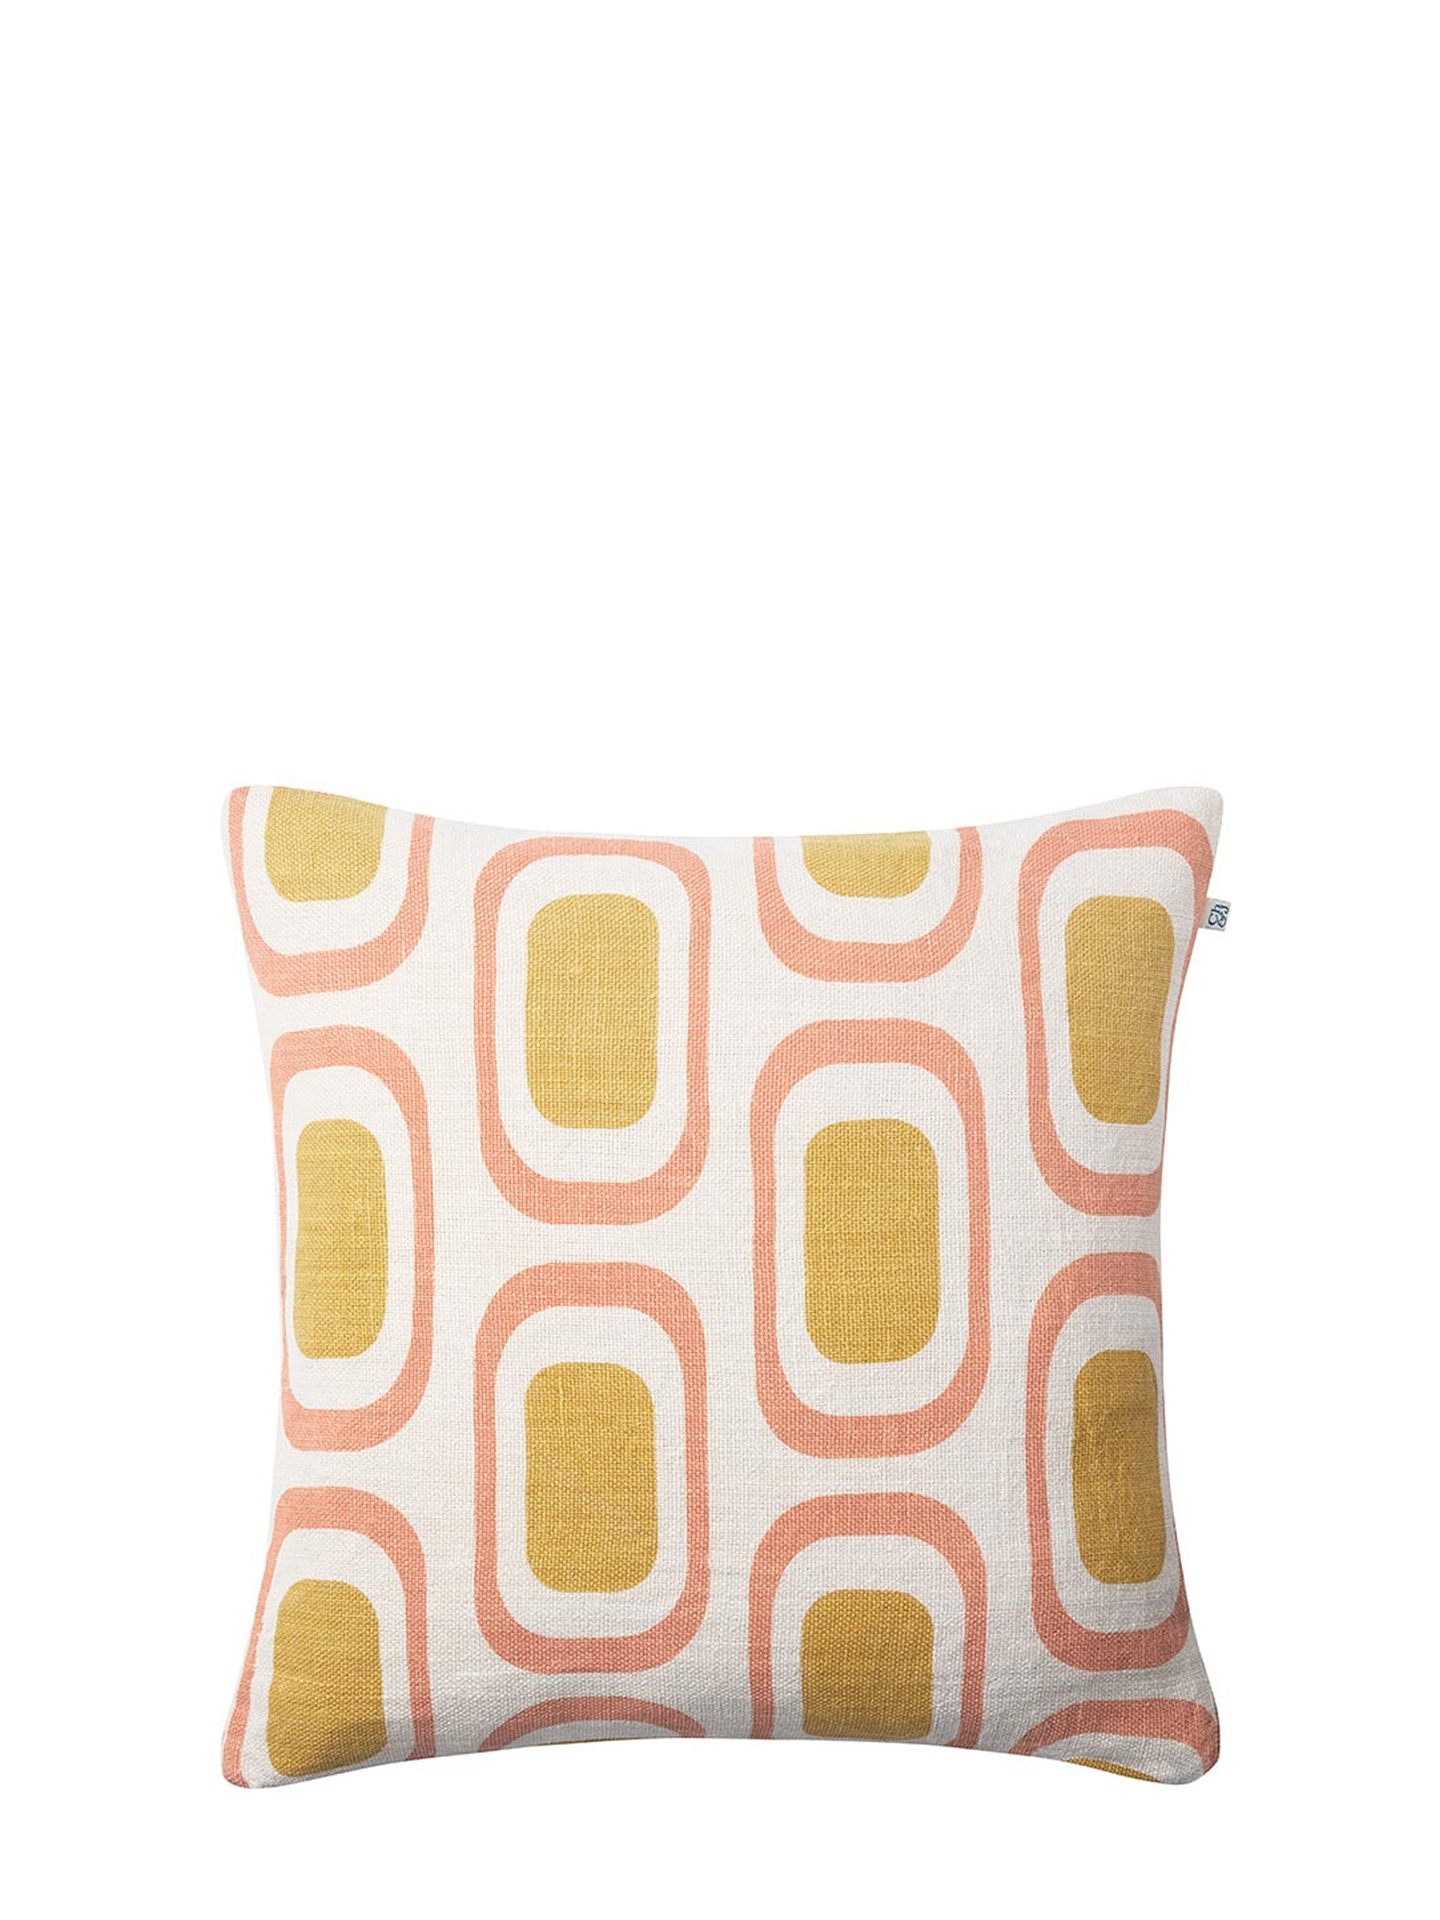 Berar Cushion Cover, Rose Pink/Spicy Yellow